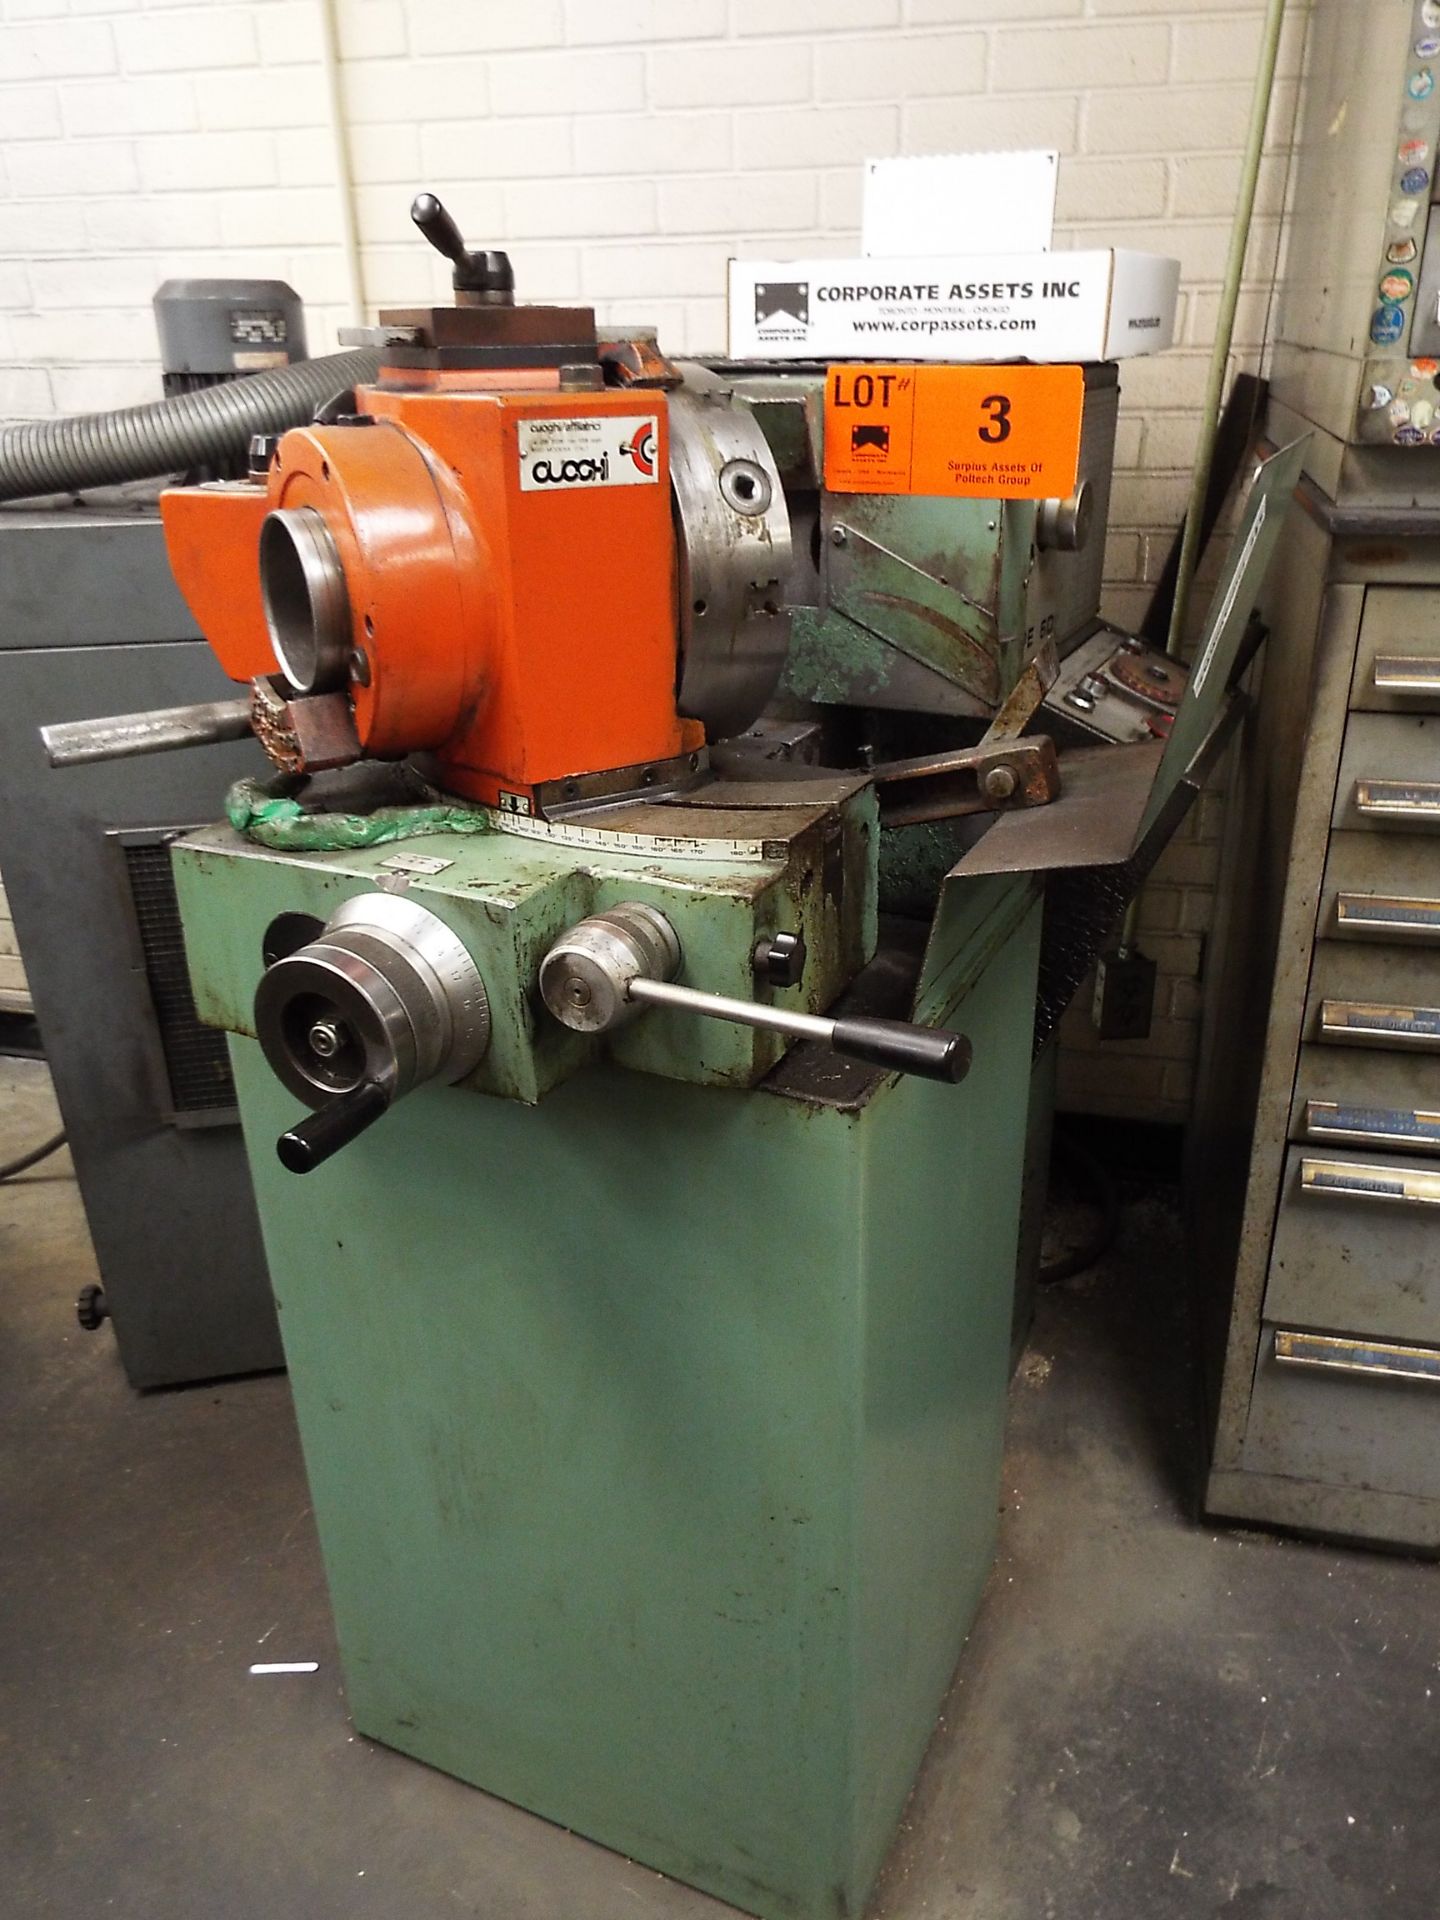 CUOGHI APE 60 TOOL AND CUTTER GRINDER WITH 10" 6-JAW CHUCK, S/N: 8031 (CI) (LOCATED AT 460 SIGNET